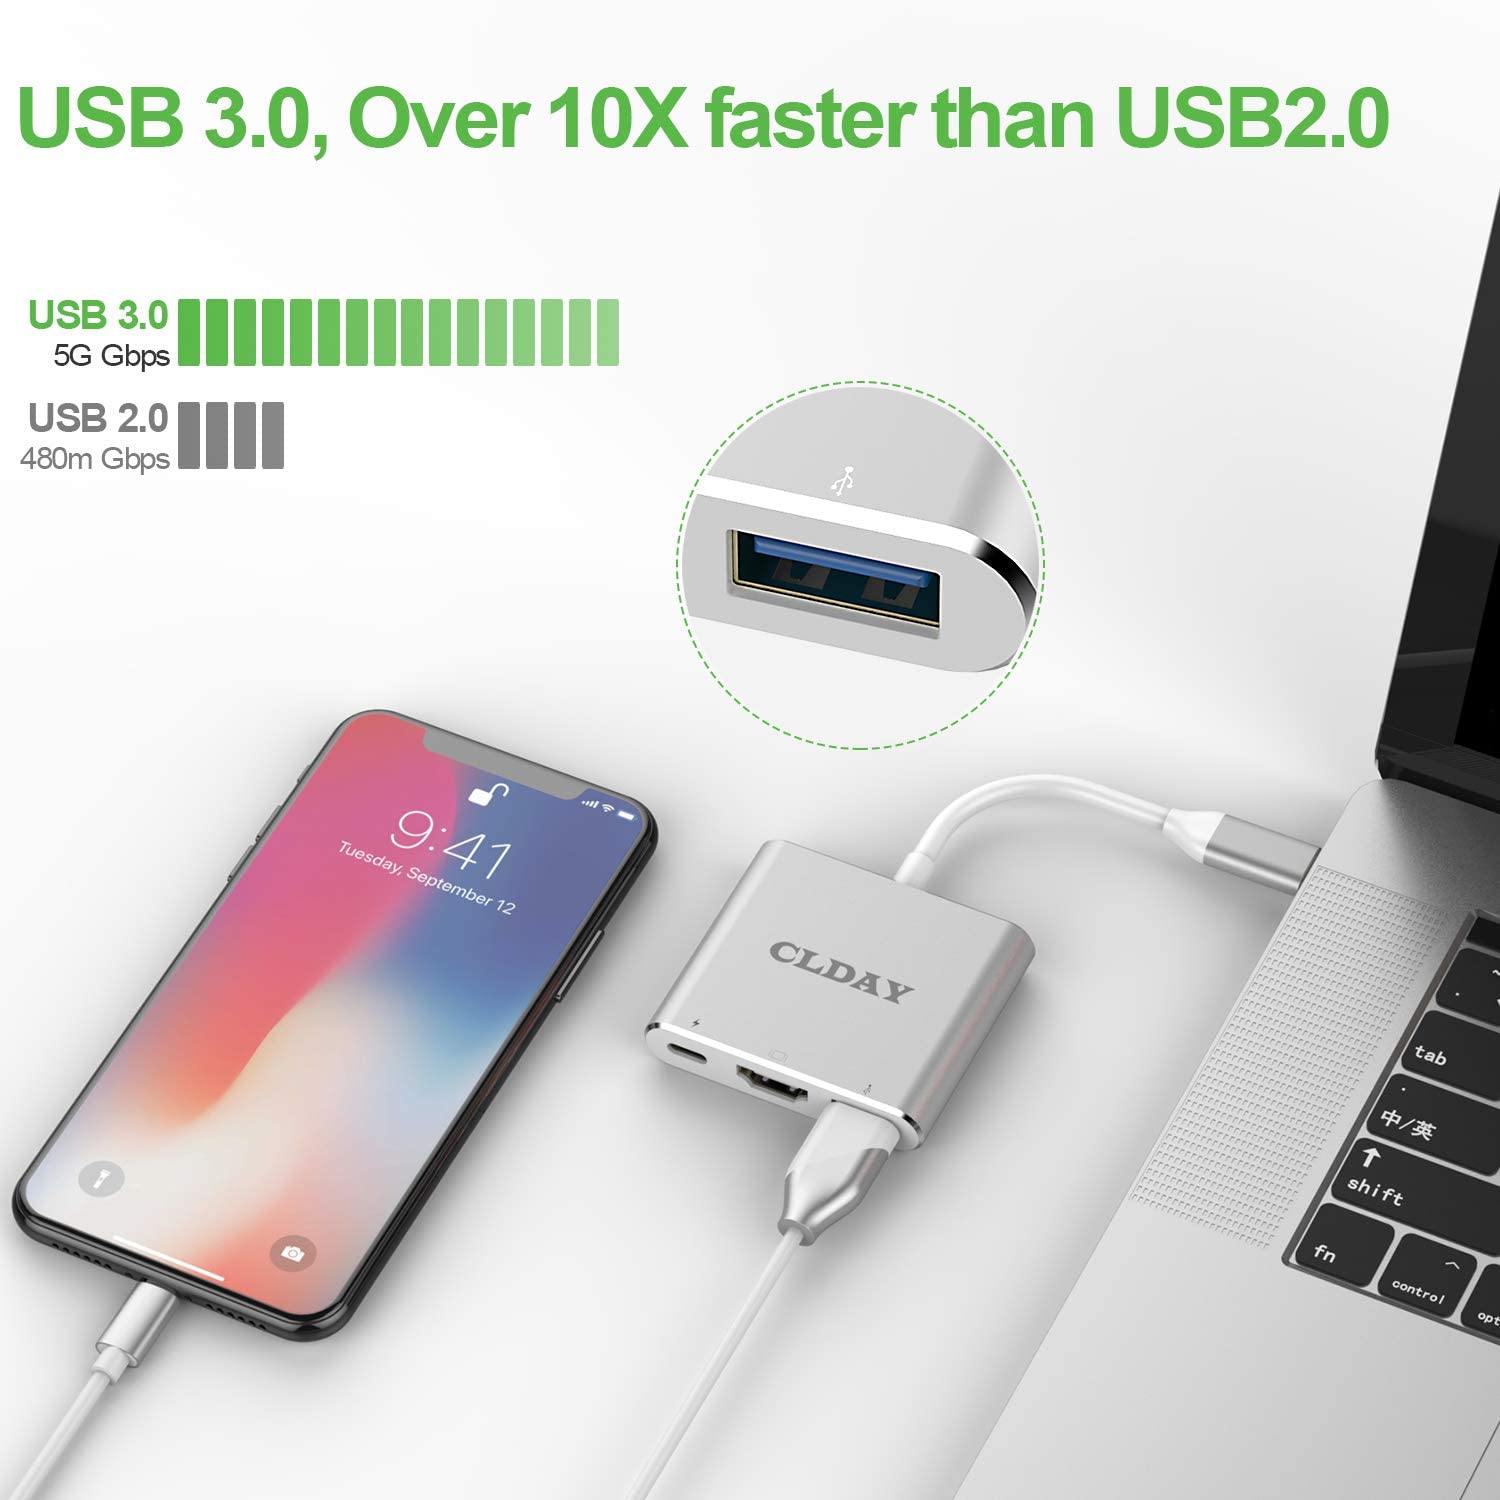 USB-C to HDMI Adapter, 4K CLDAY USB Type-C (Thunderbolt 3 Compatible) Multiport Hub - e4cents